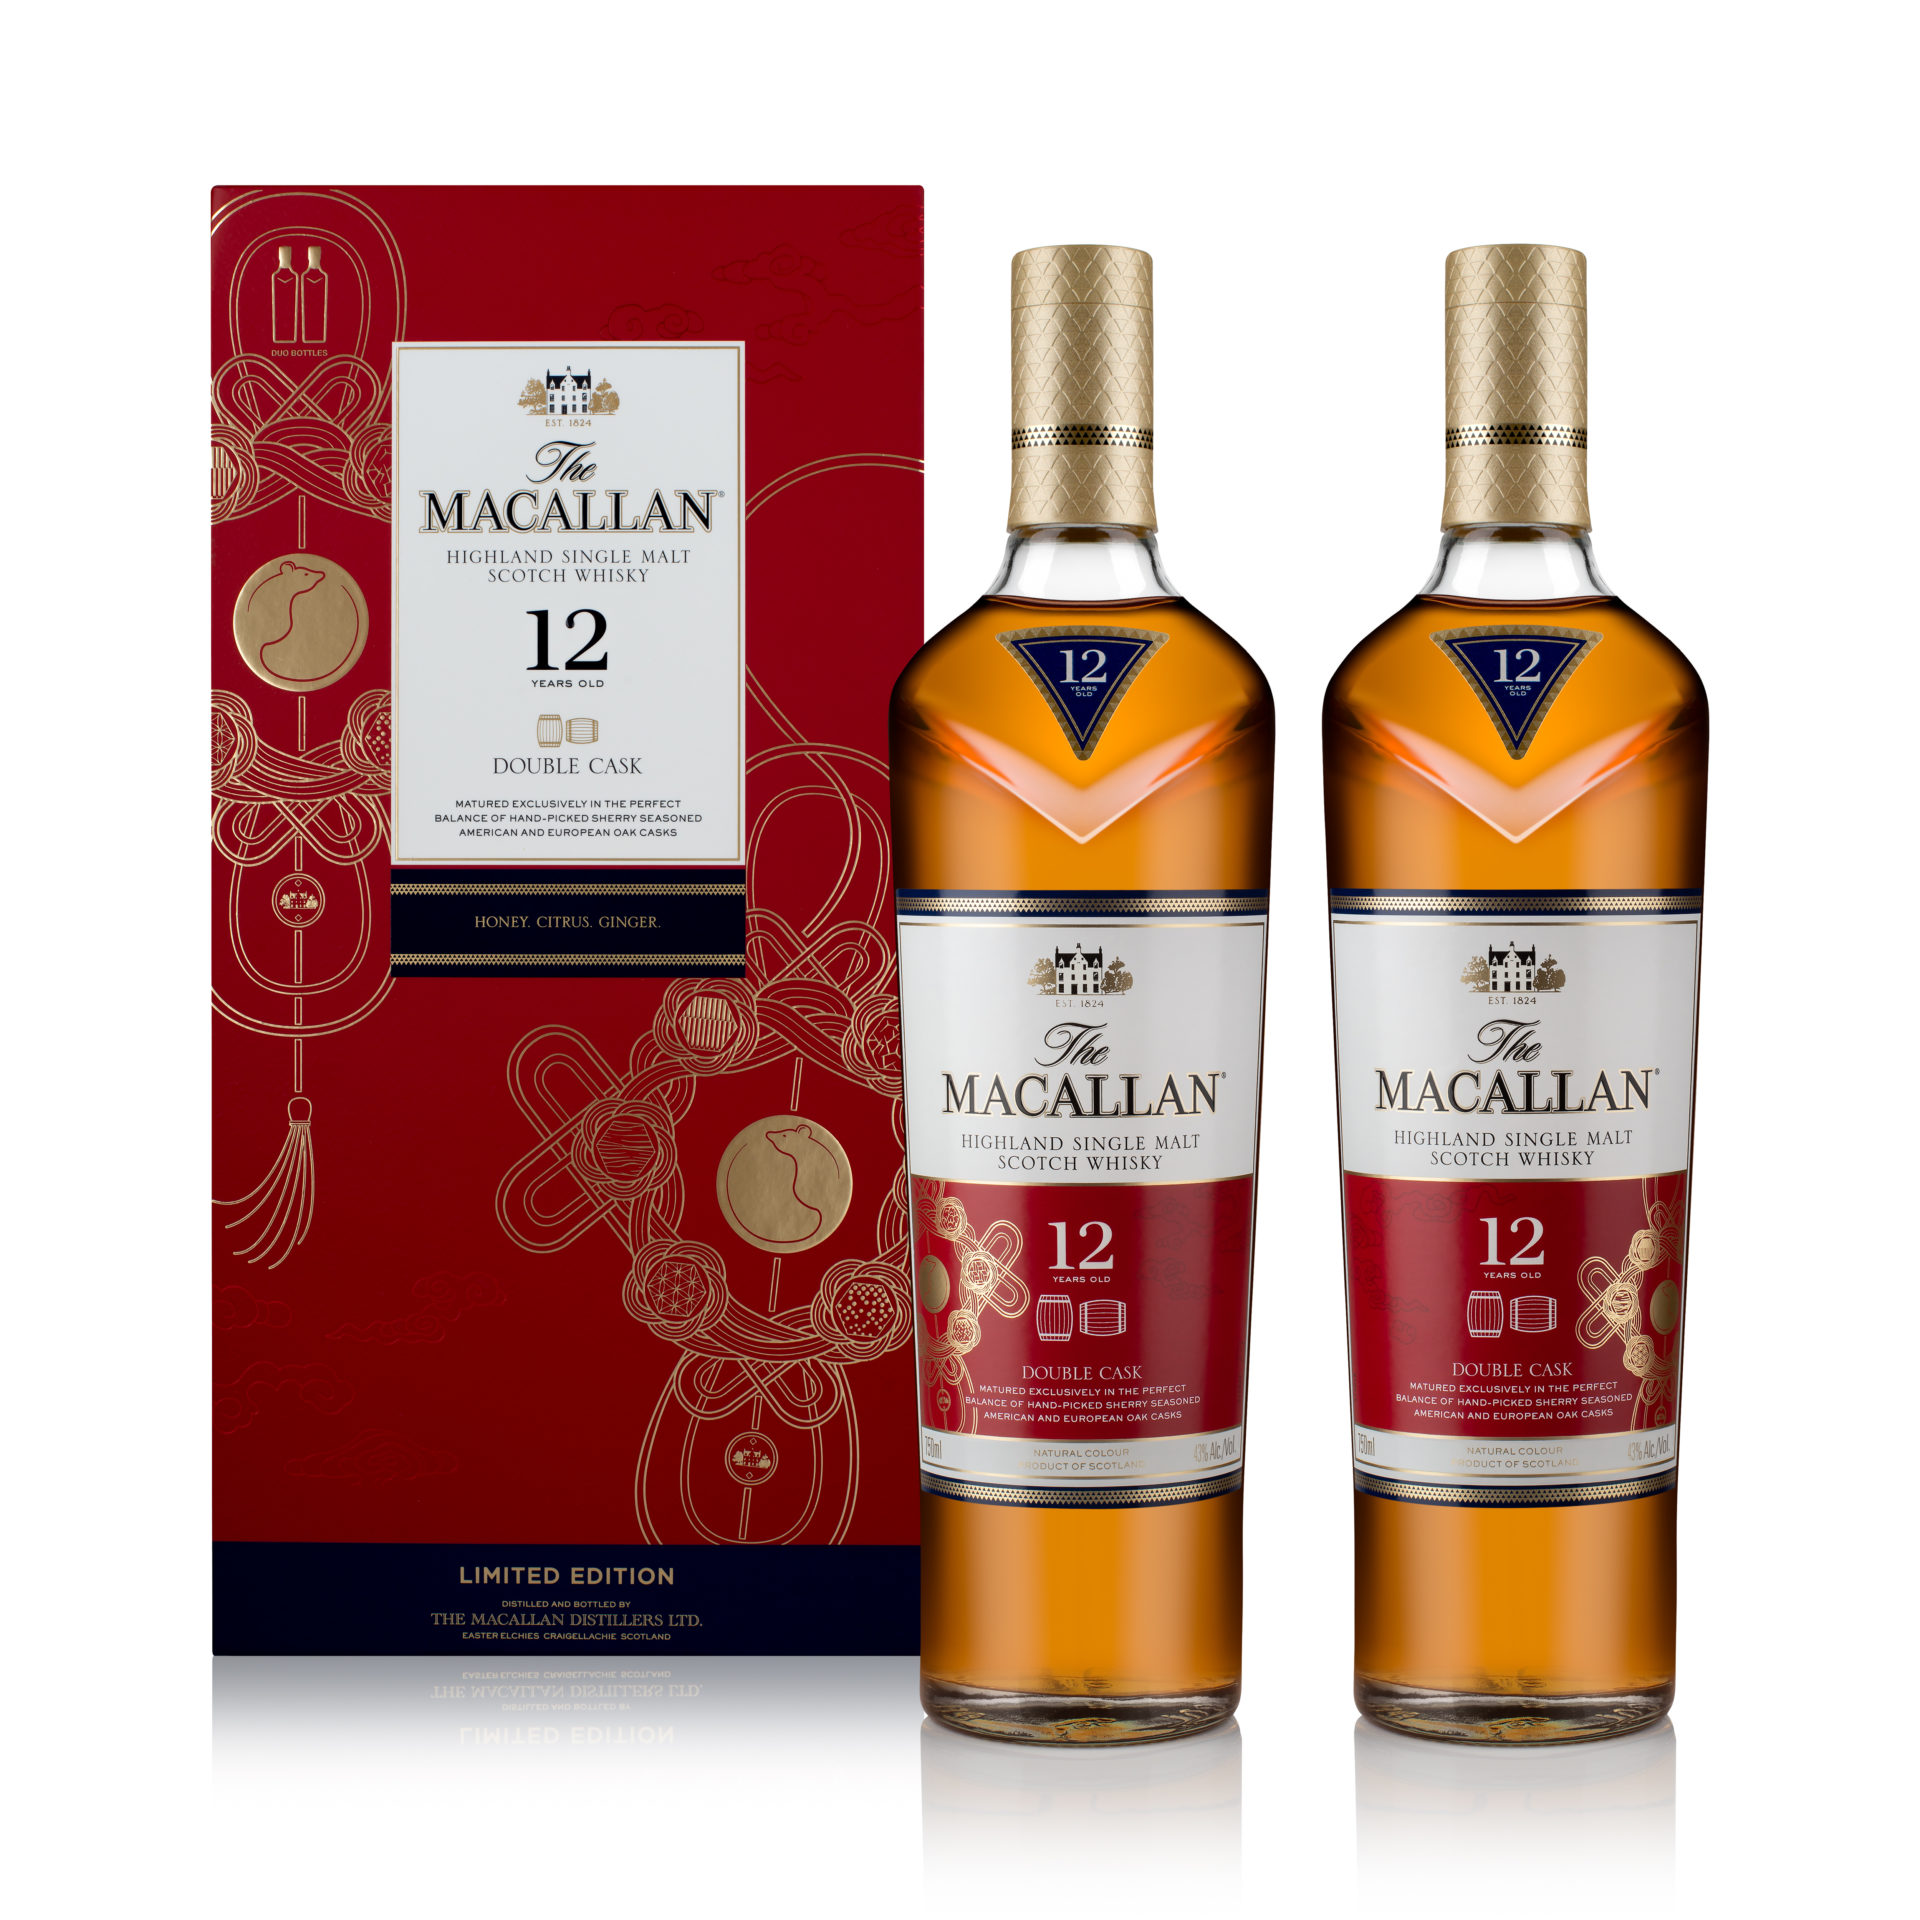 The Macallan Celebrates The Year Of The Rat With The Release Of A Limited Edition Lunar New Year Gift Set Spirited Magazine